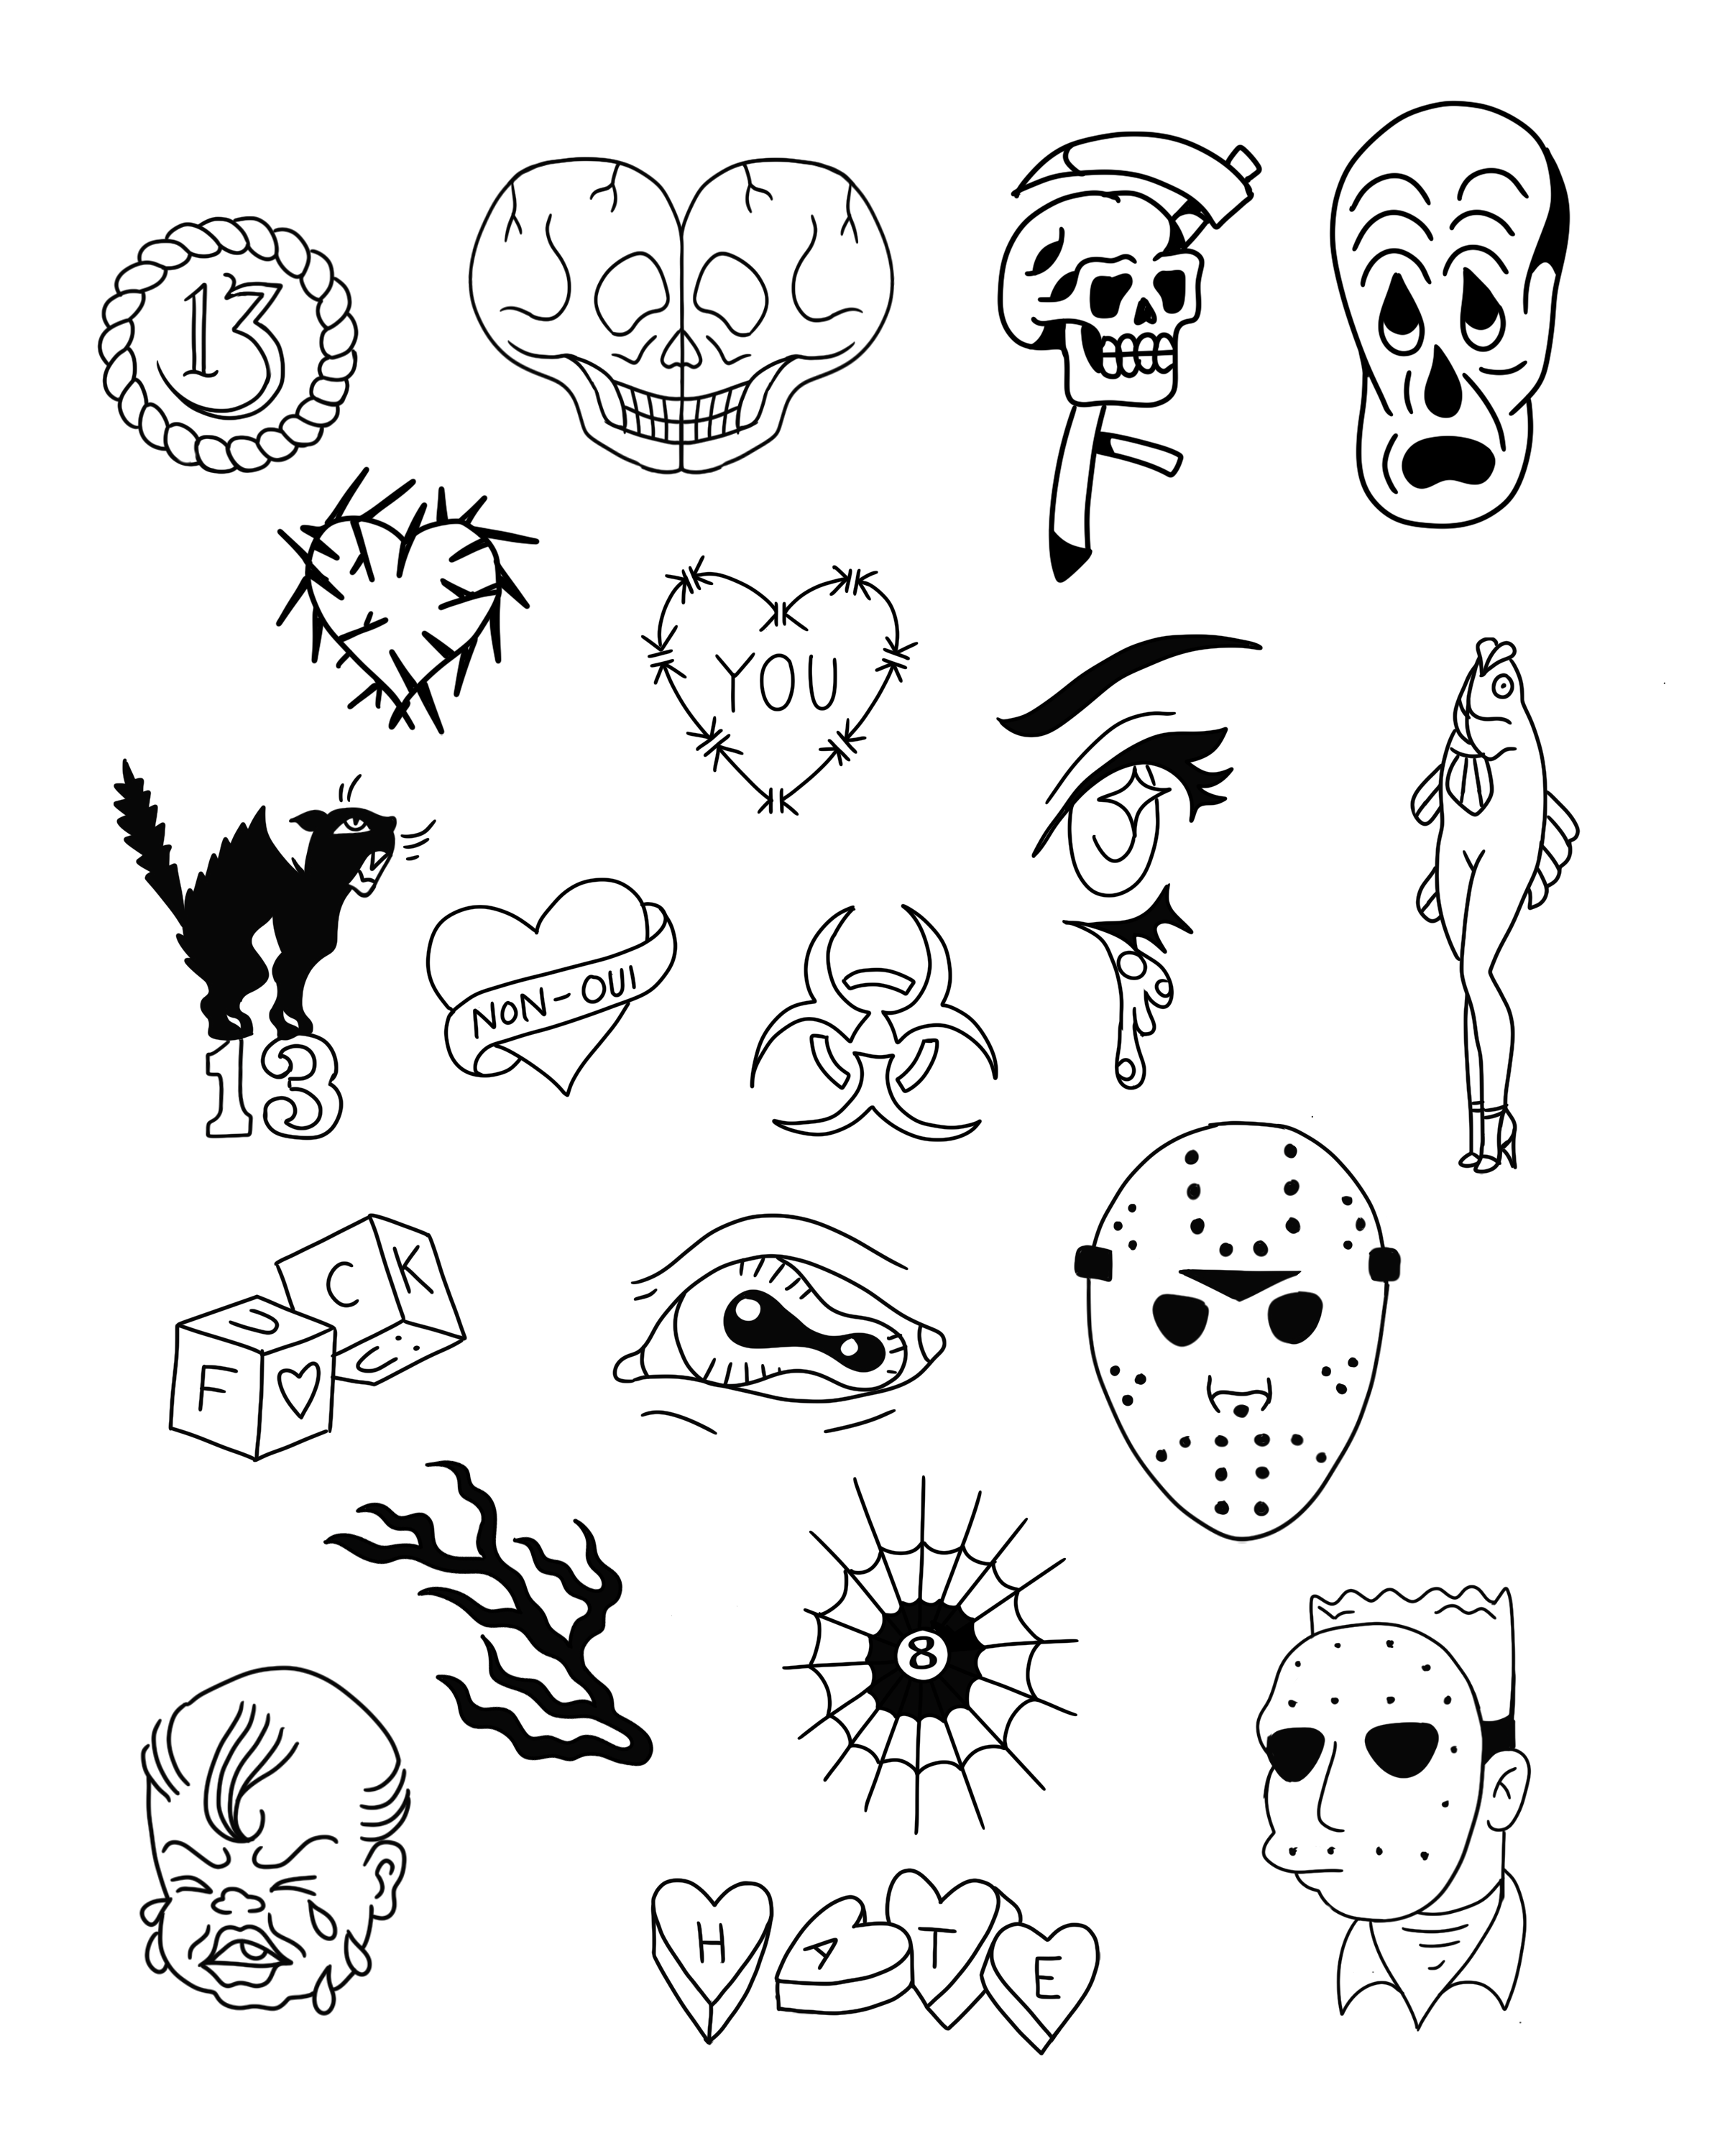 Tattoo Nerd Friday the 13th Tattoo Specials What You Need to Know